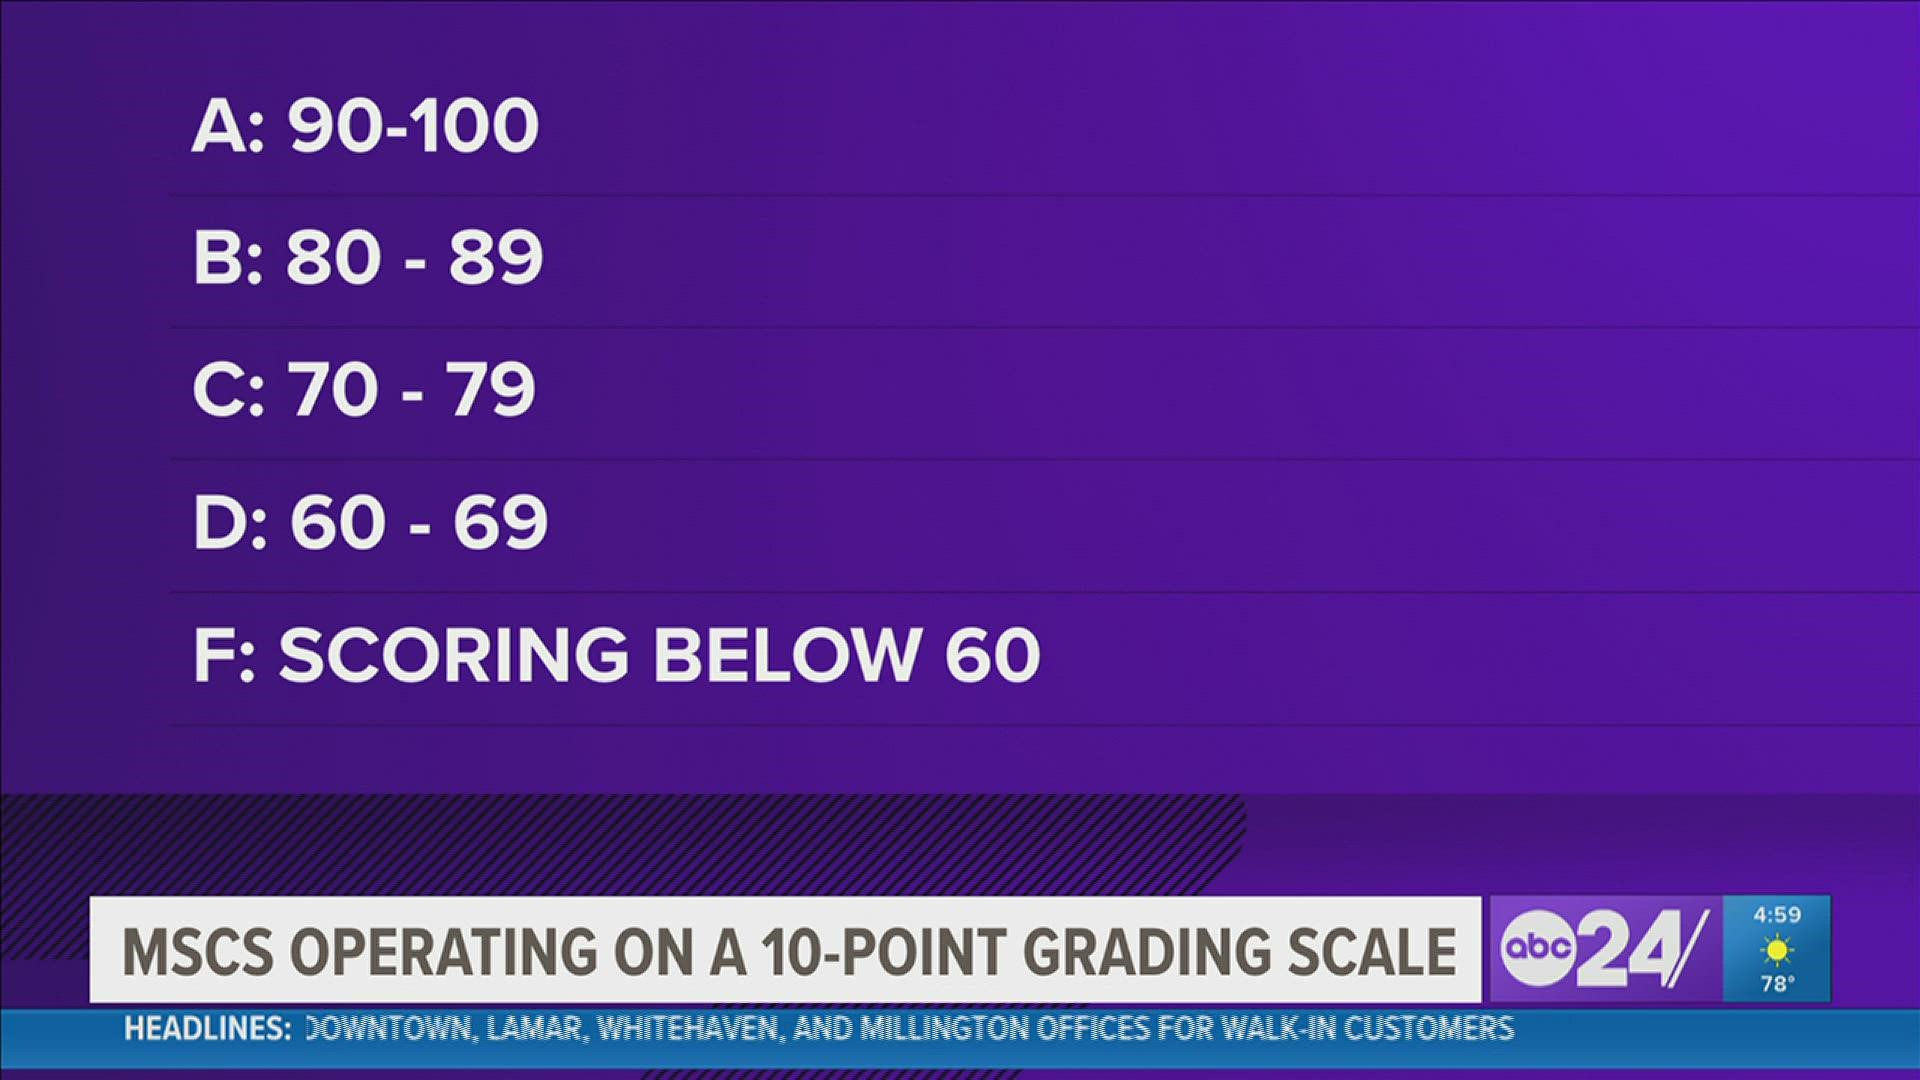 This year, Tennessee public schools moved to a 10-point grading scale.